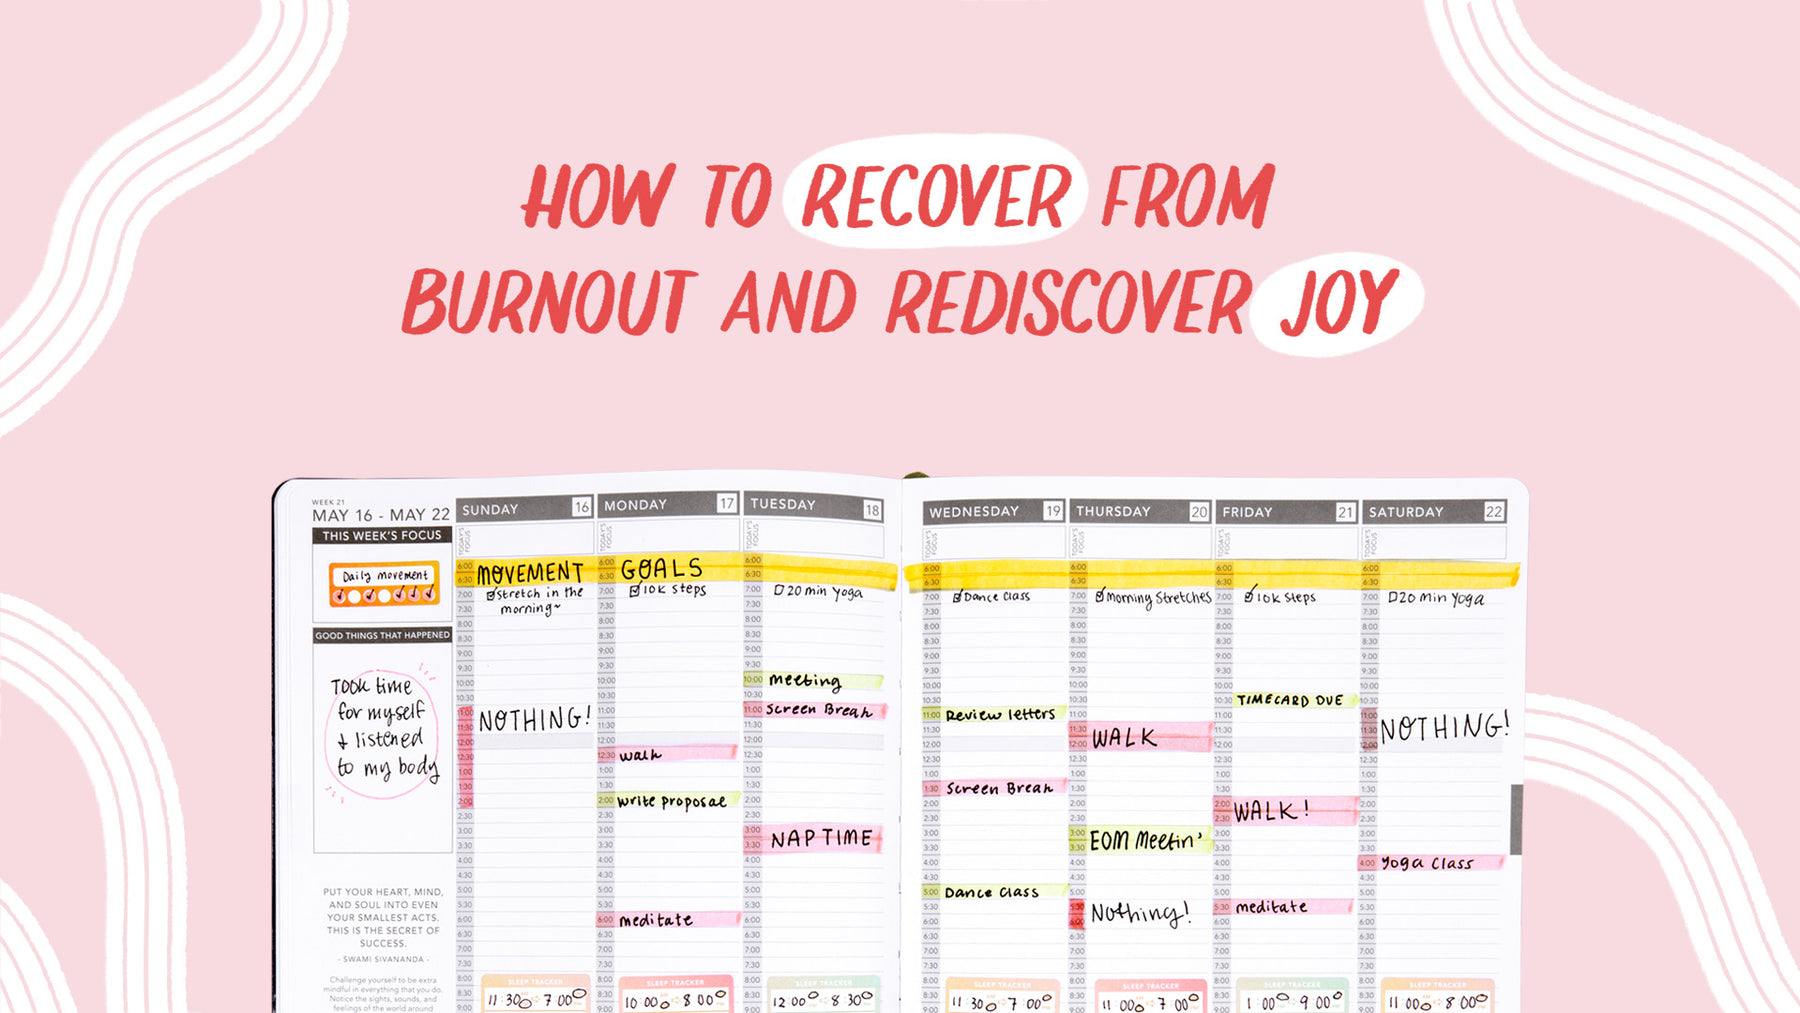 How to Recover From Burnout and Rediscover Joy